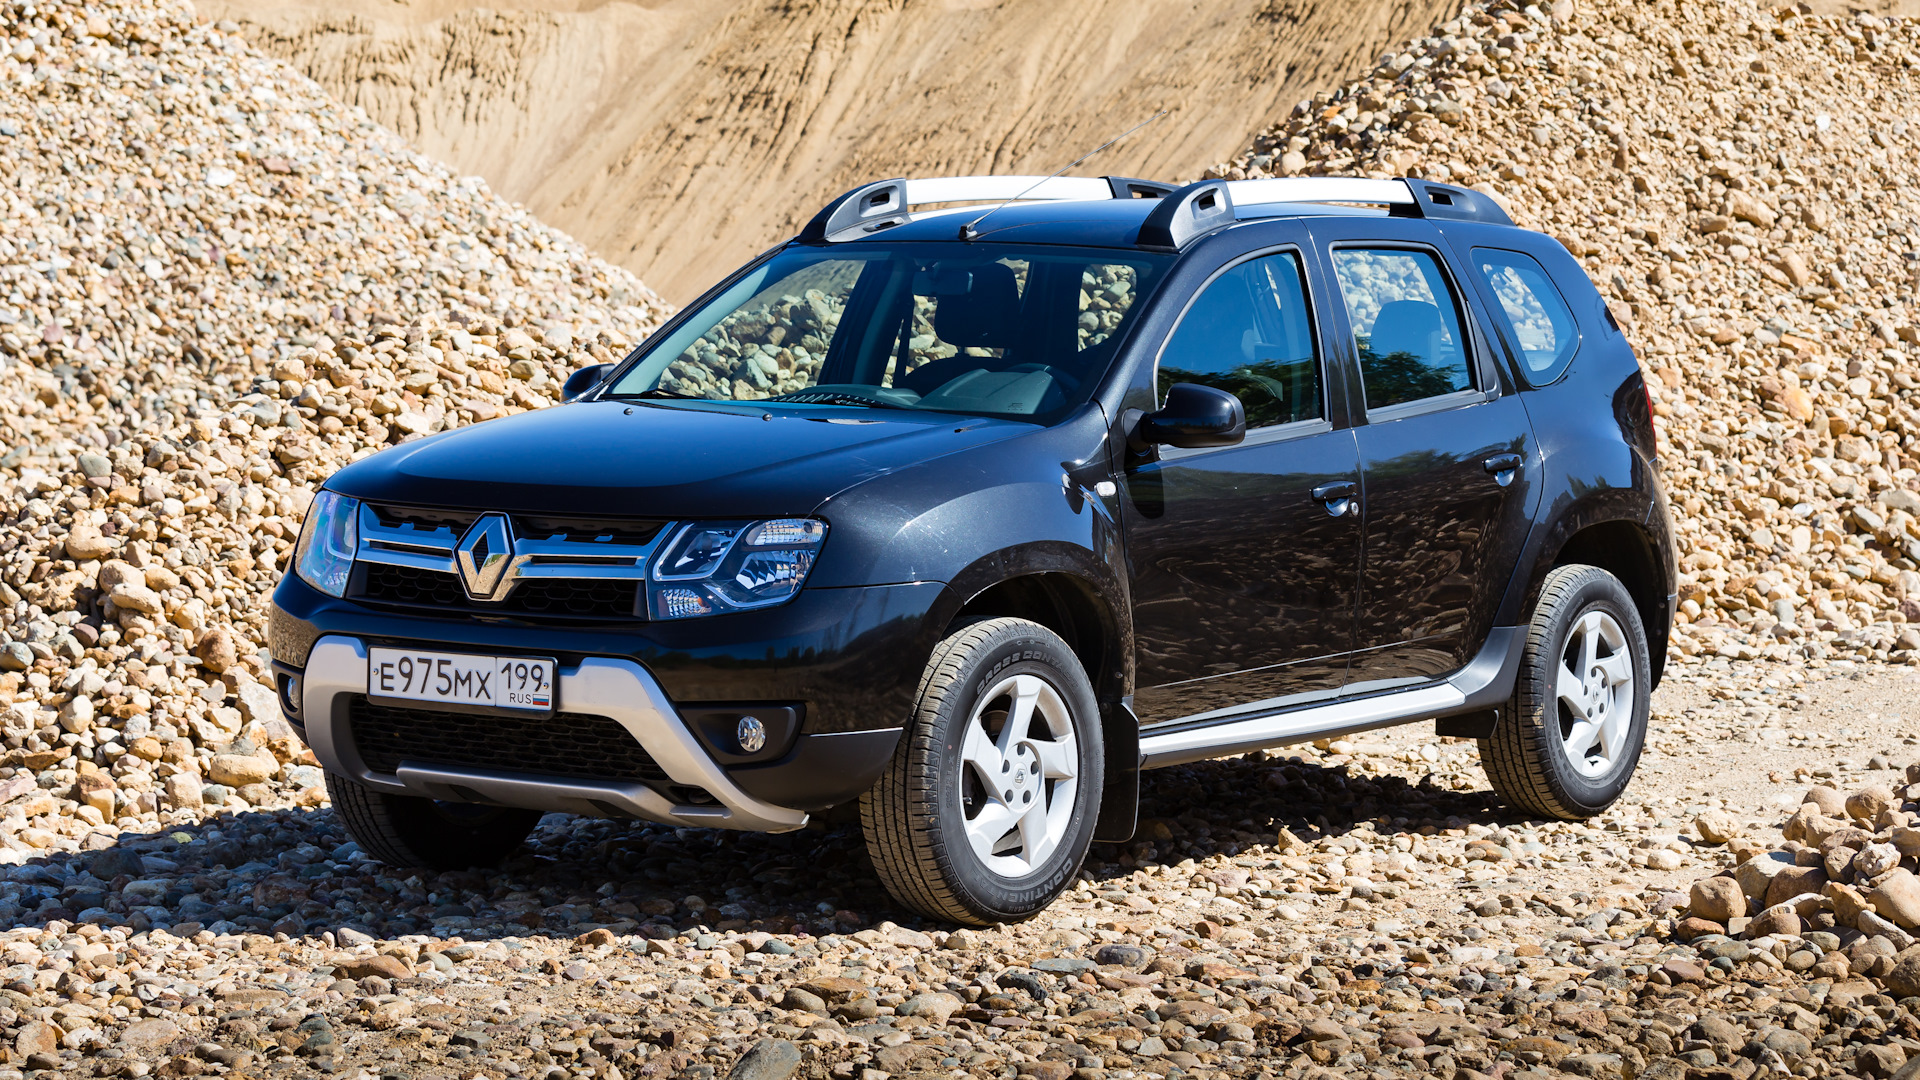 Рено дастер 2.0 4wd. Renault Duster 2. Renault Duster 2016. Renault Duster 4. Рено Дастер 2021.